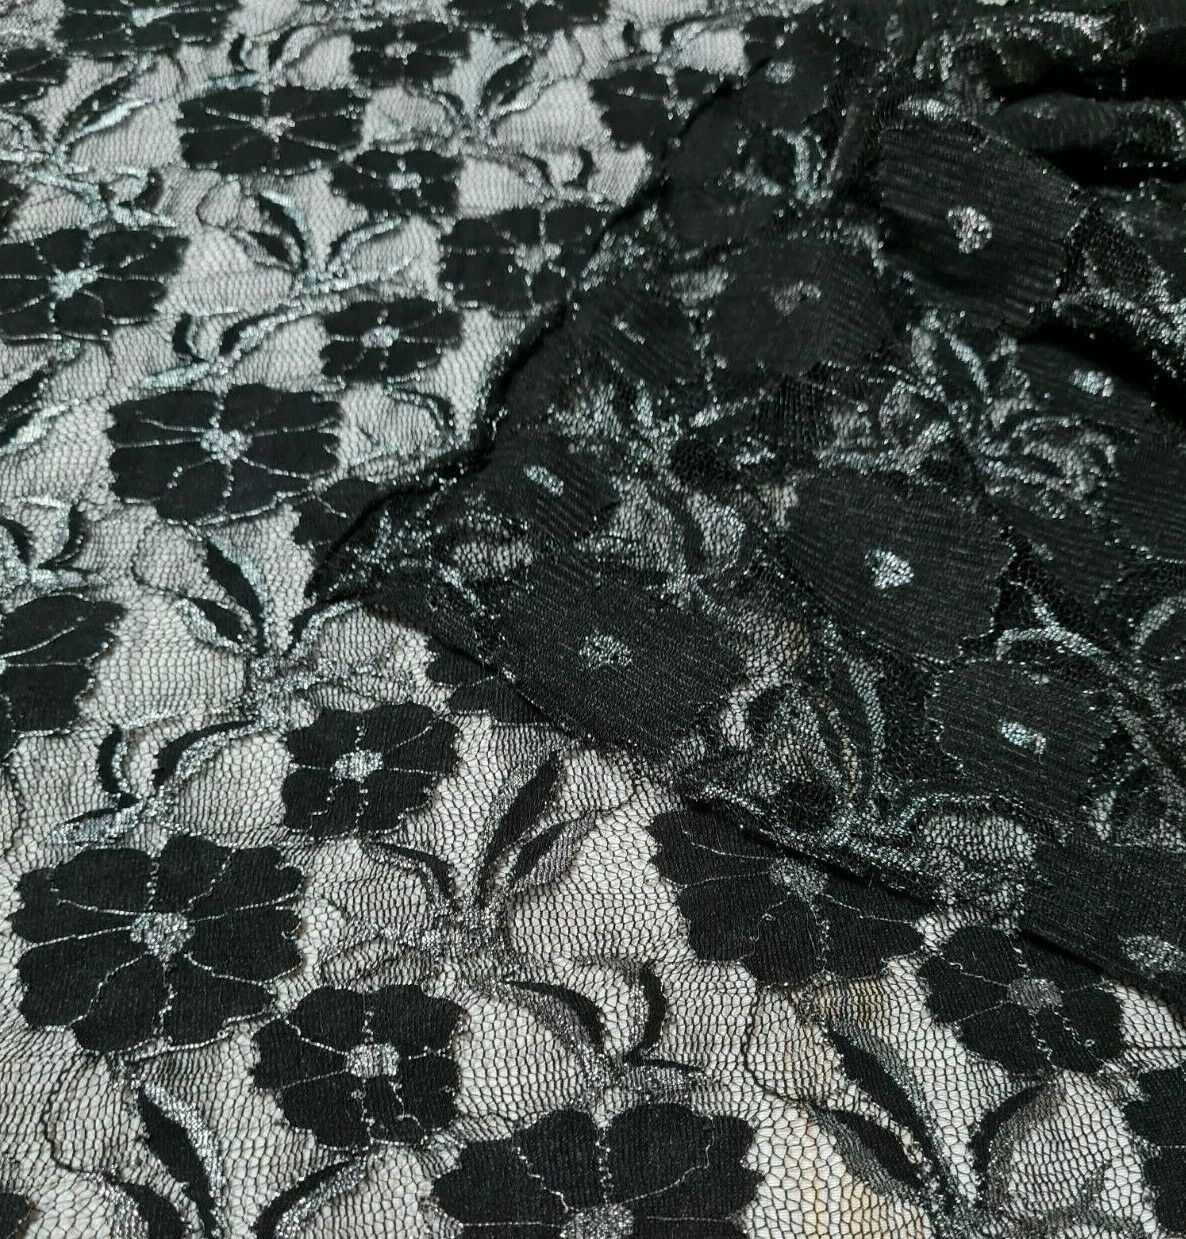 BLACK LACE FABRIC FLORAL SILVER SHINY STRETCH - SOLD BY THE METRE